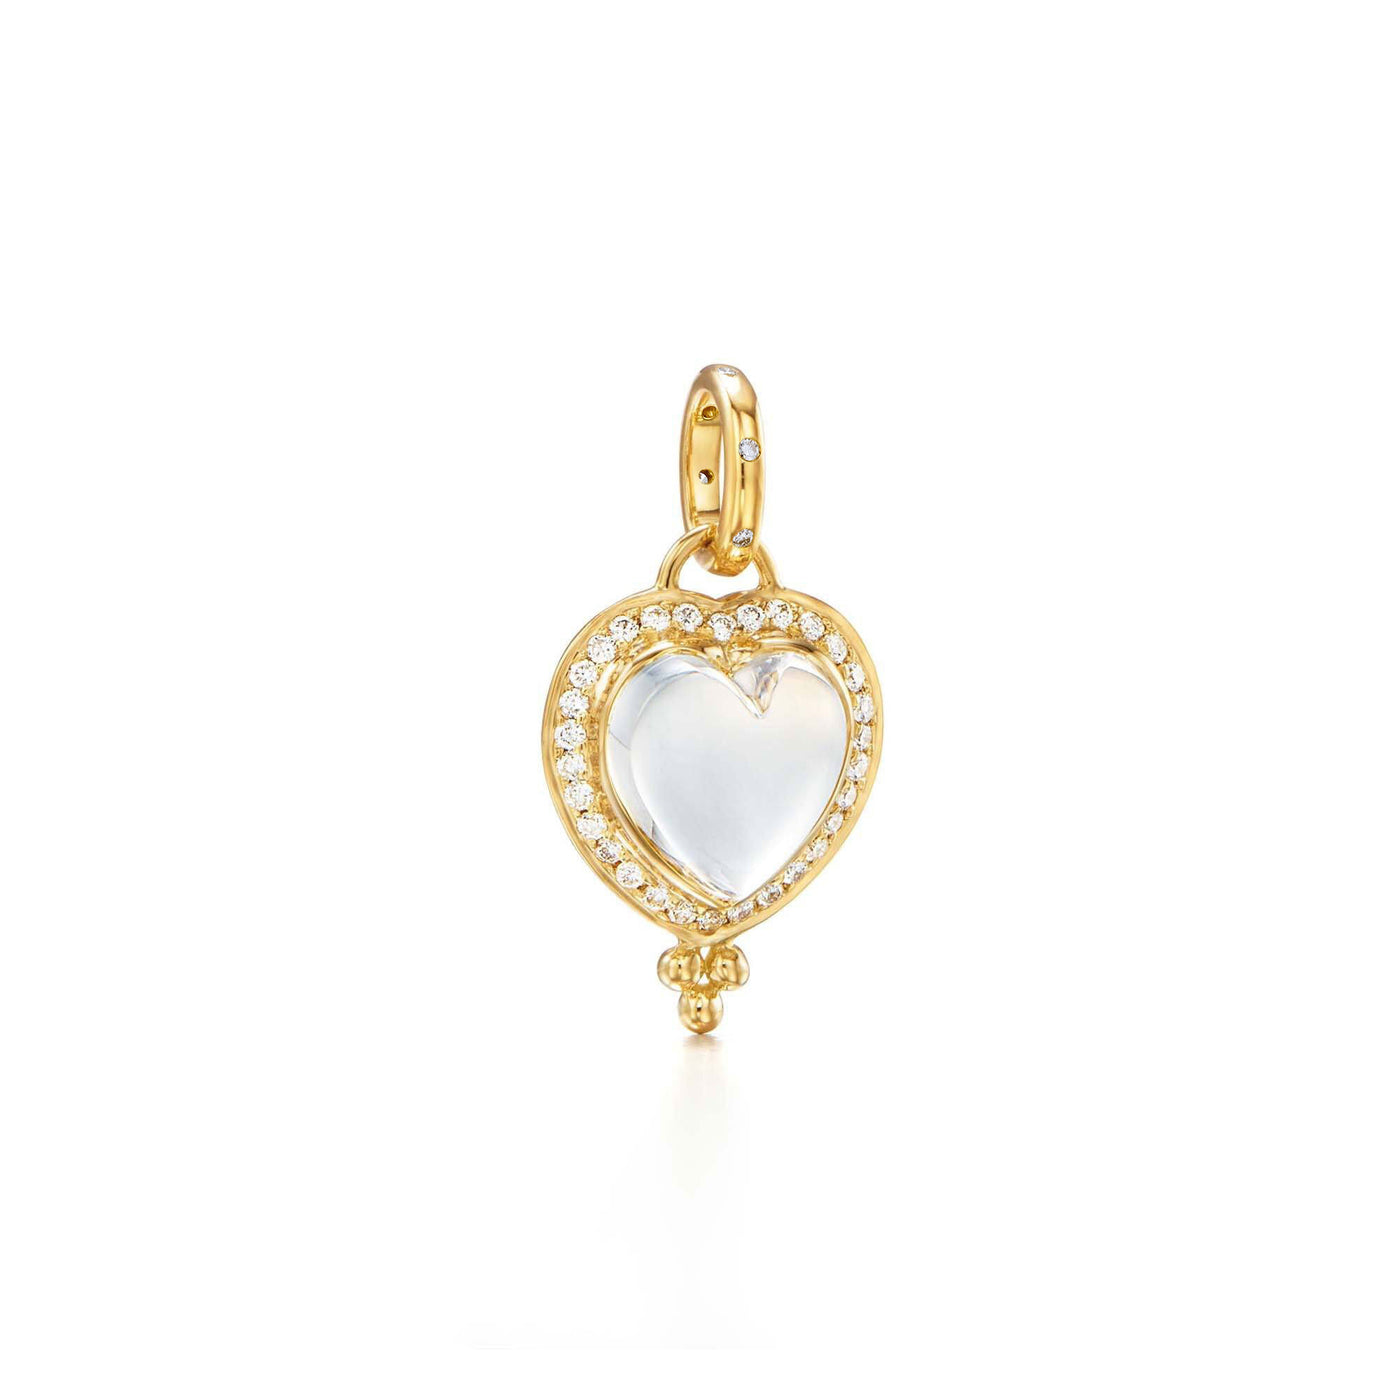 Small Rock Crystal Heart Pendant with Diamonds